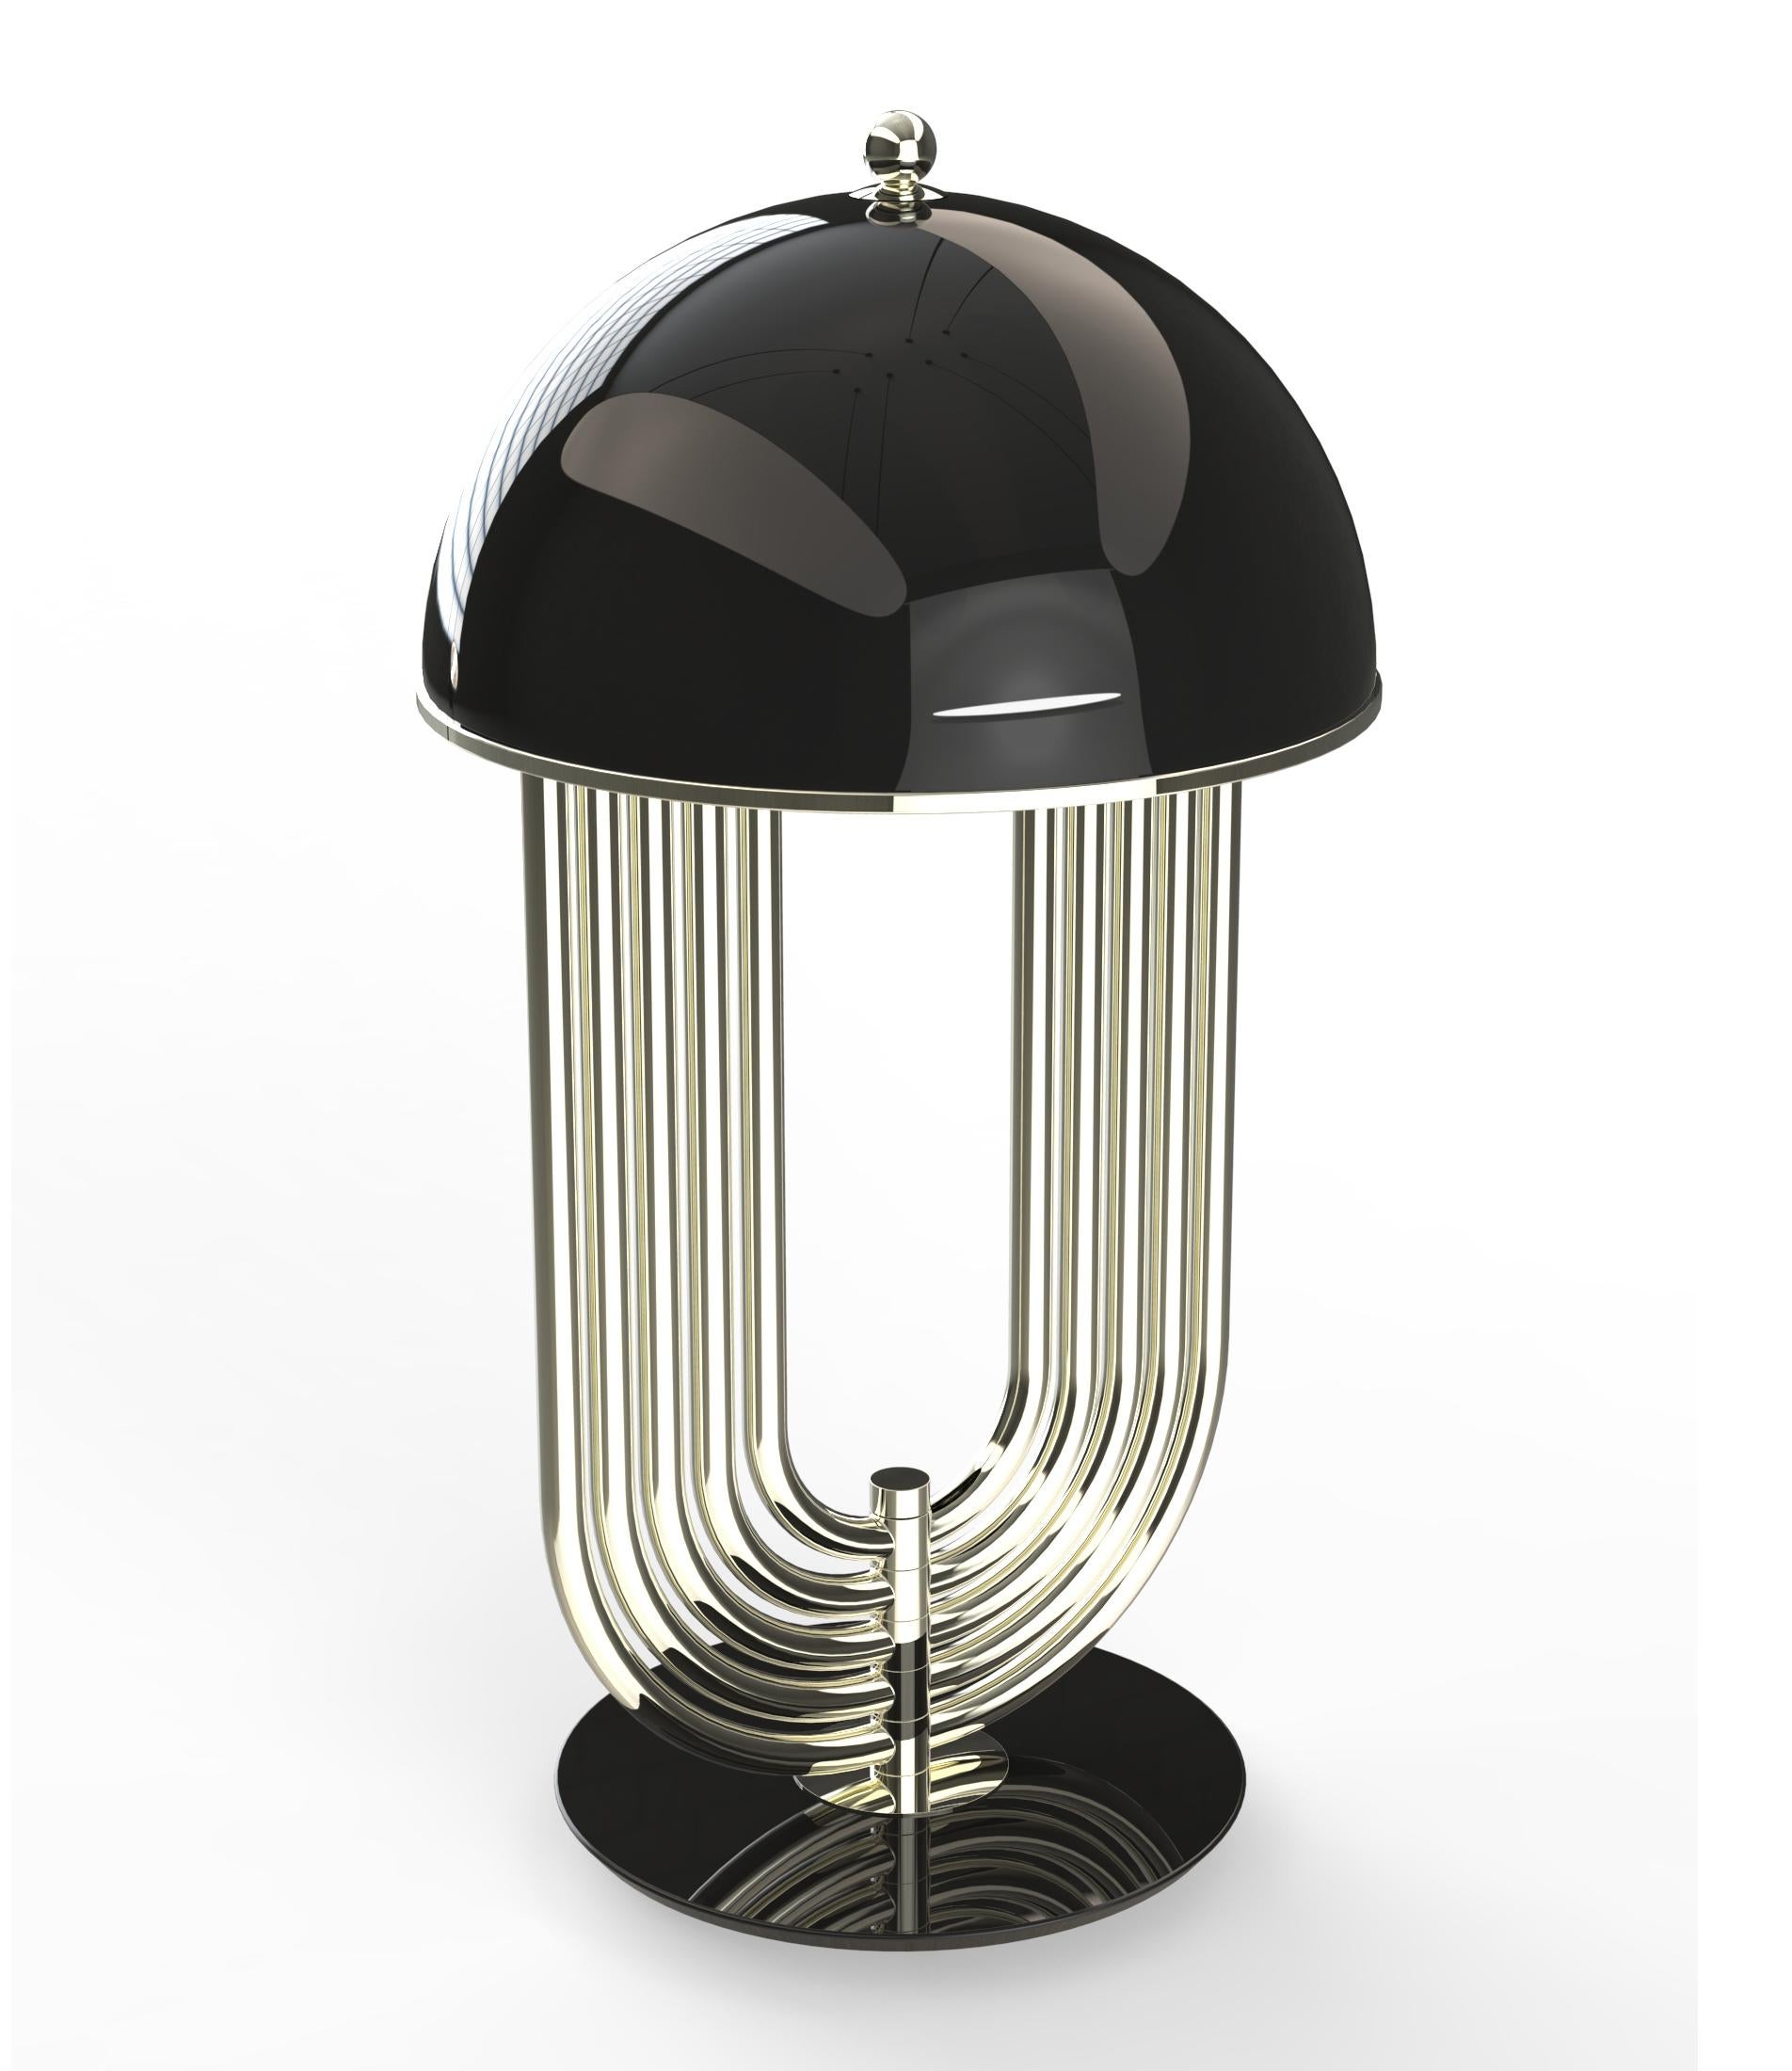 Turner Art Deco table lamp was inspired by the electrifying and memorable dance moves of the iconic pop singer. Tuner is a large table lamp handmade in brass and aluminum. The body has a gold plated finish, while the shade was lacquered a black